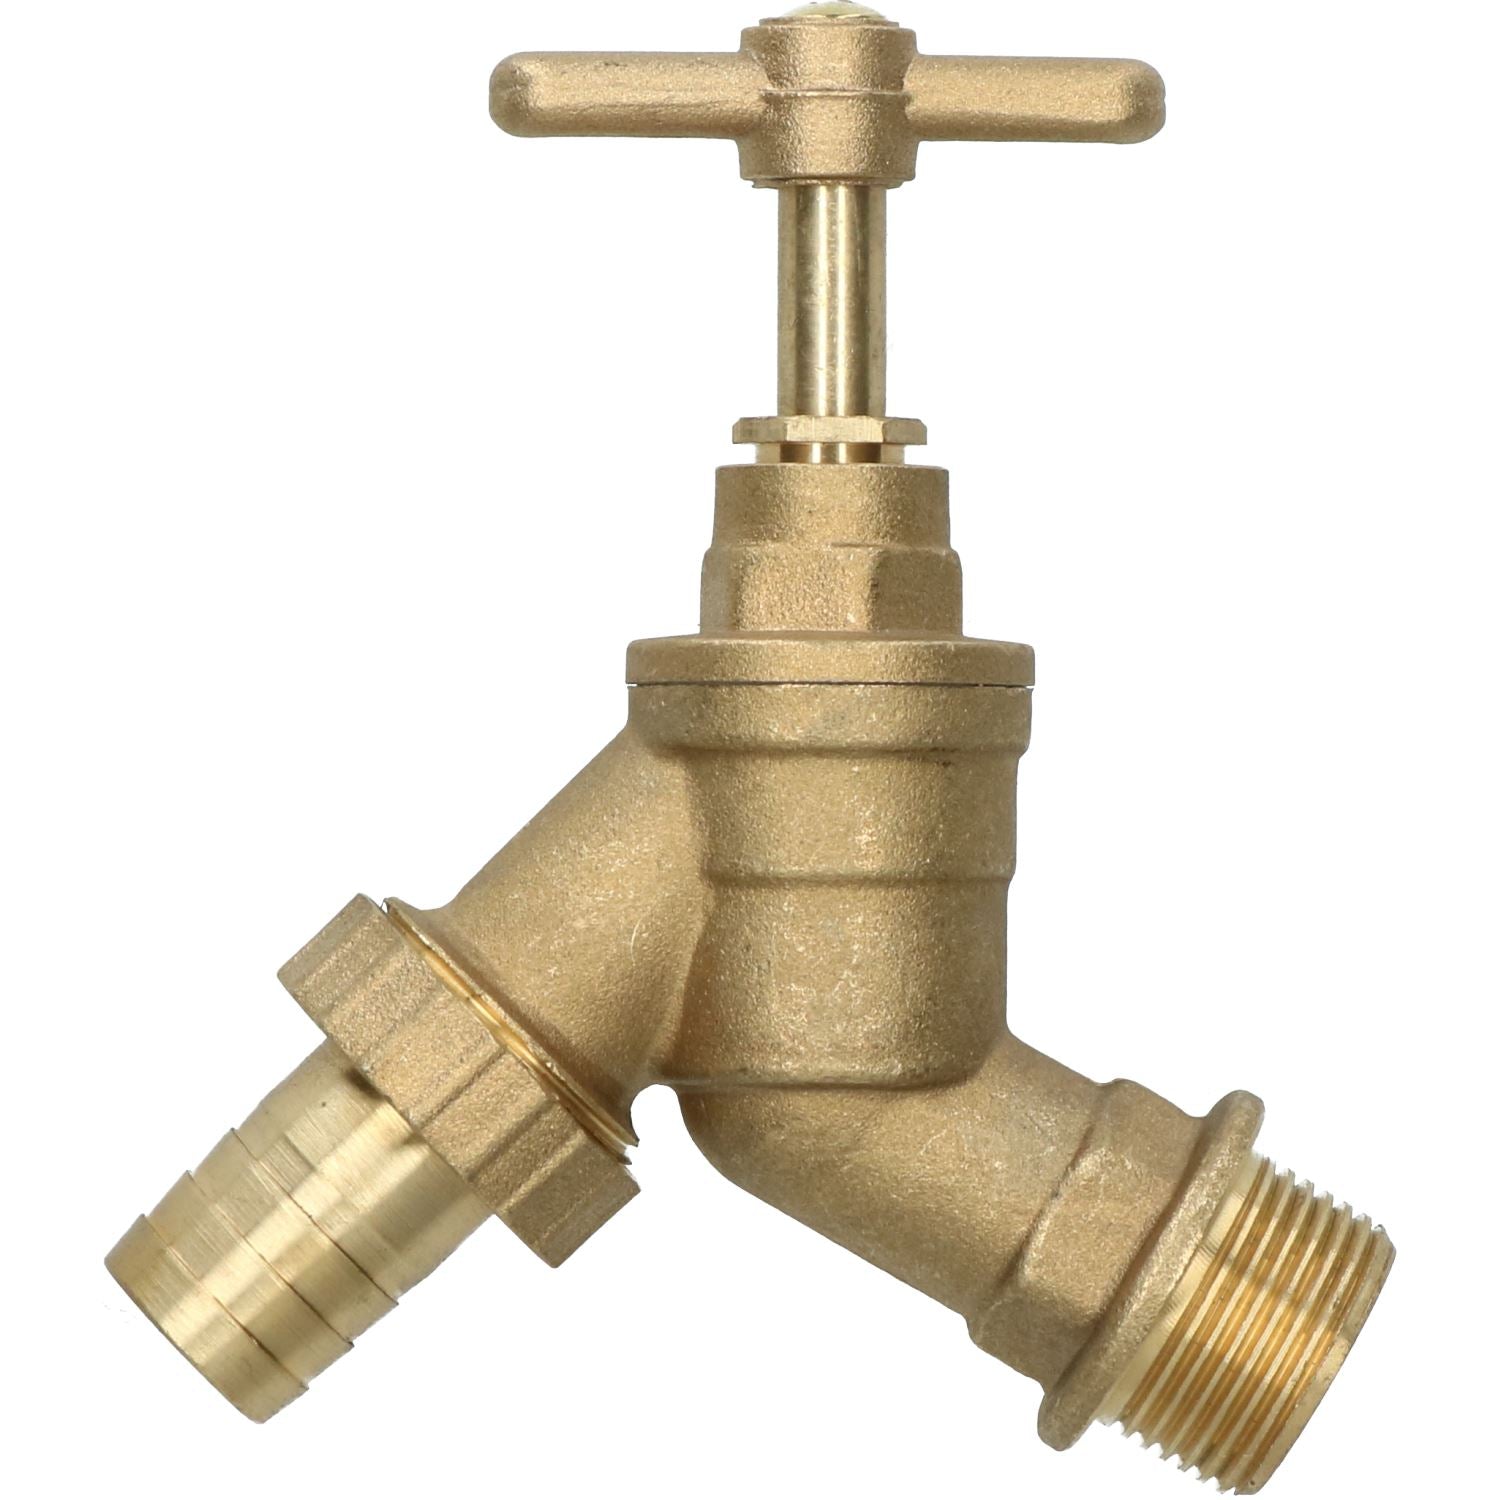 3/4" Hose Union Bib Tap Brass Outdoor Water Supply Weather-Resistant Barb